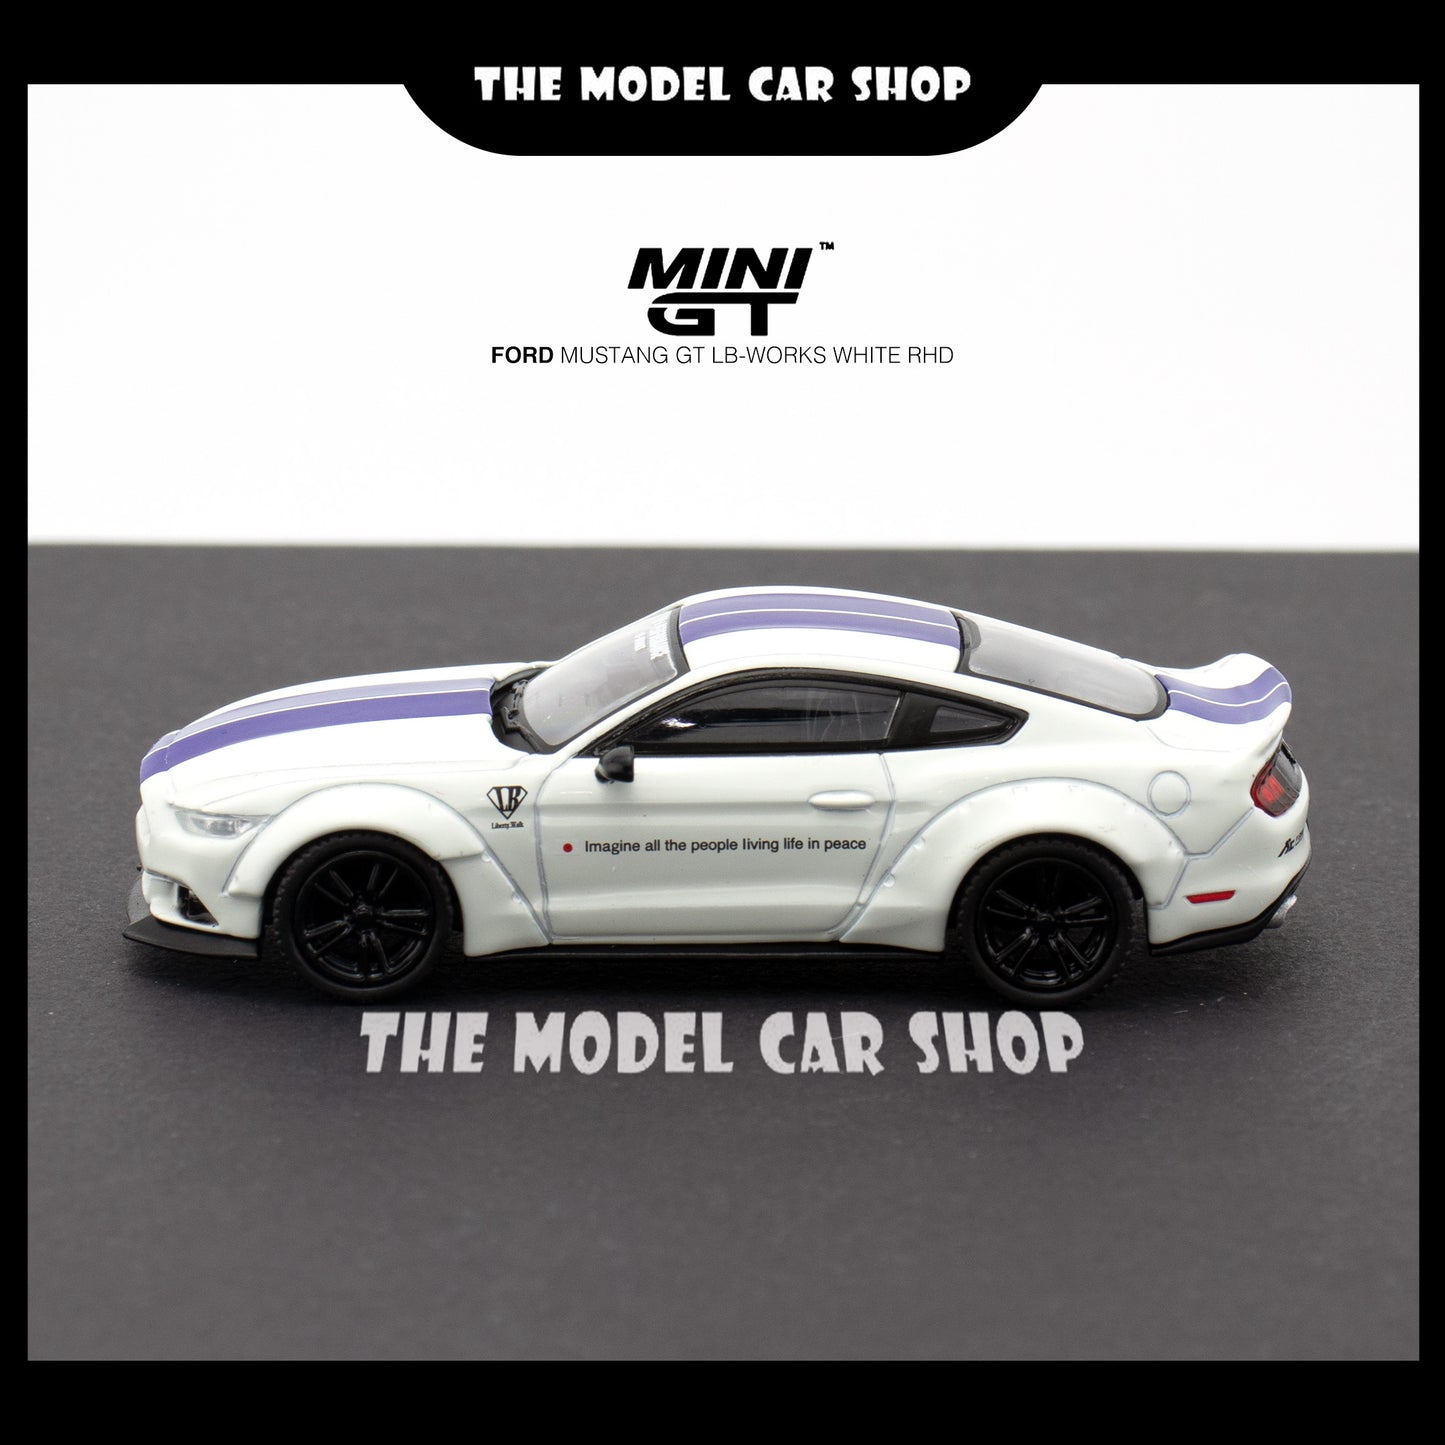 [MINI GT] Ford Mustang GT-LB Works - White